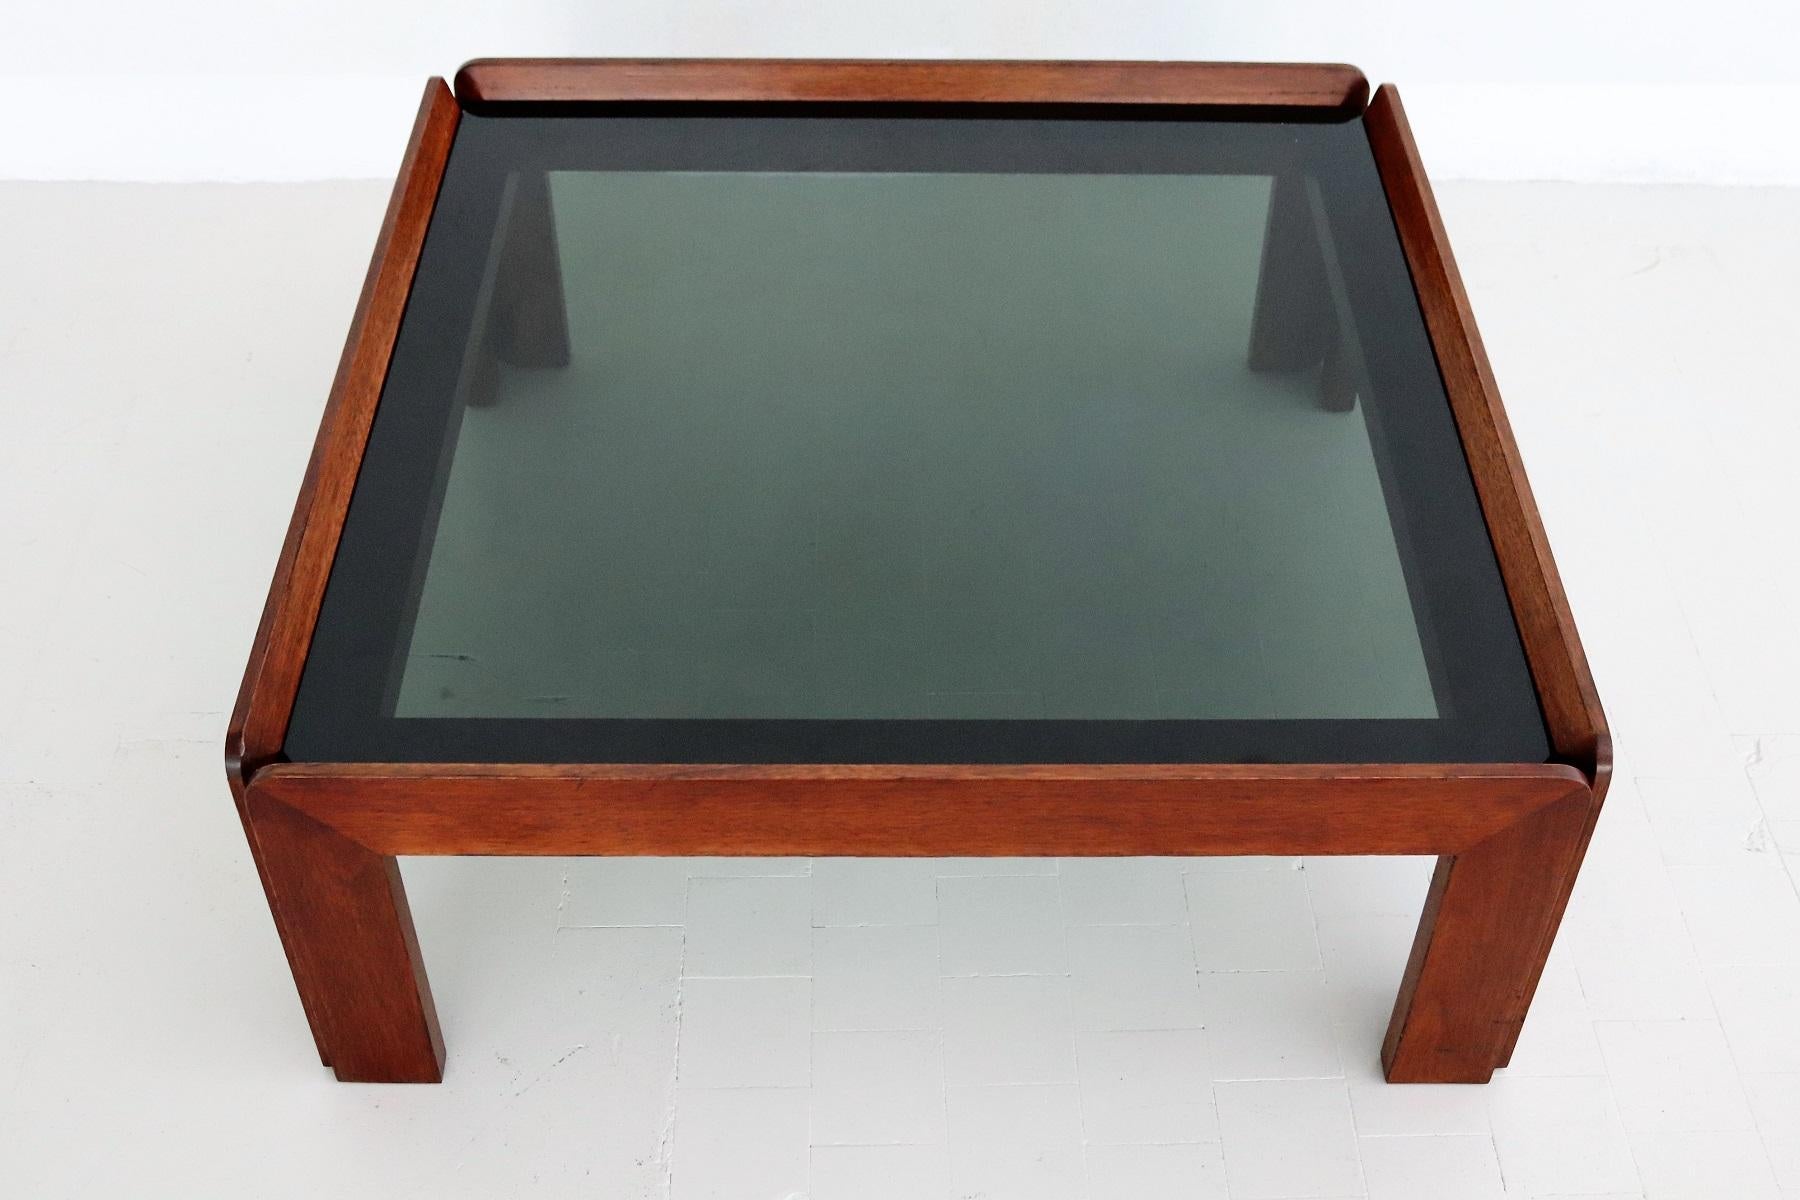 Italian Midcentury Square Coffee Table in Beechwood and Smoked Glass, 1960s For Sale 6